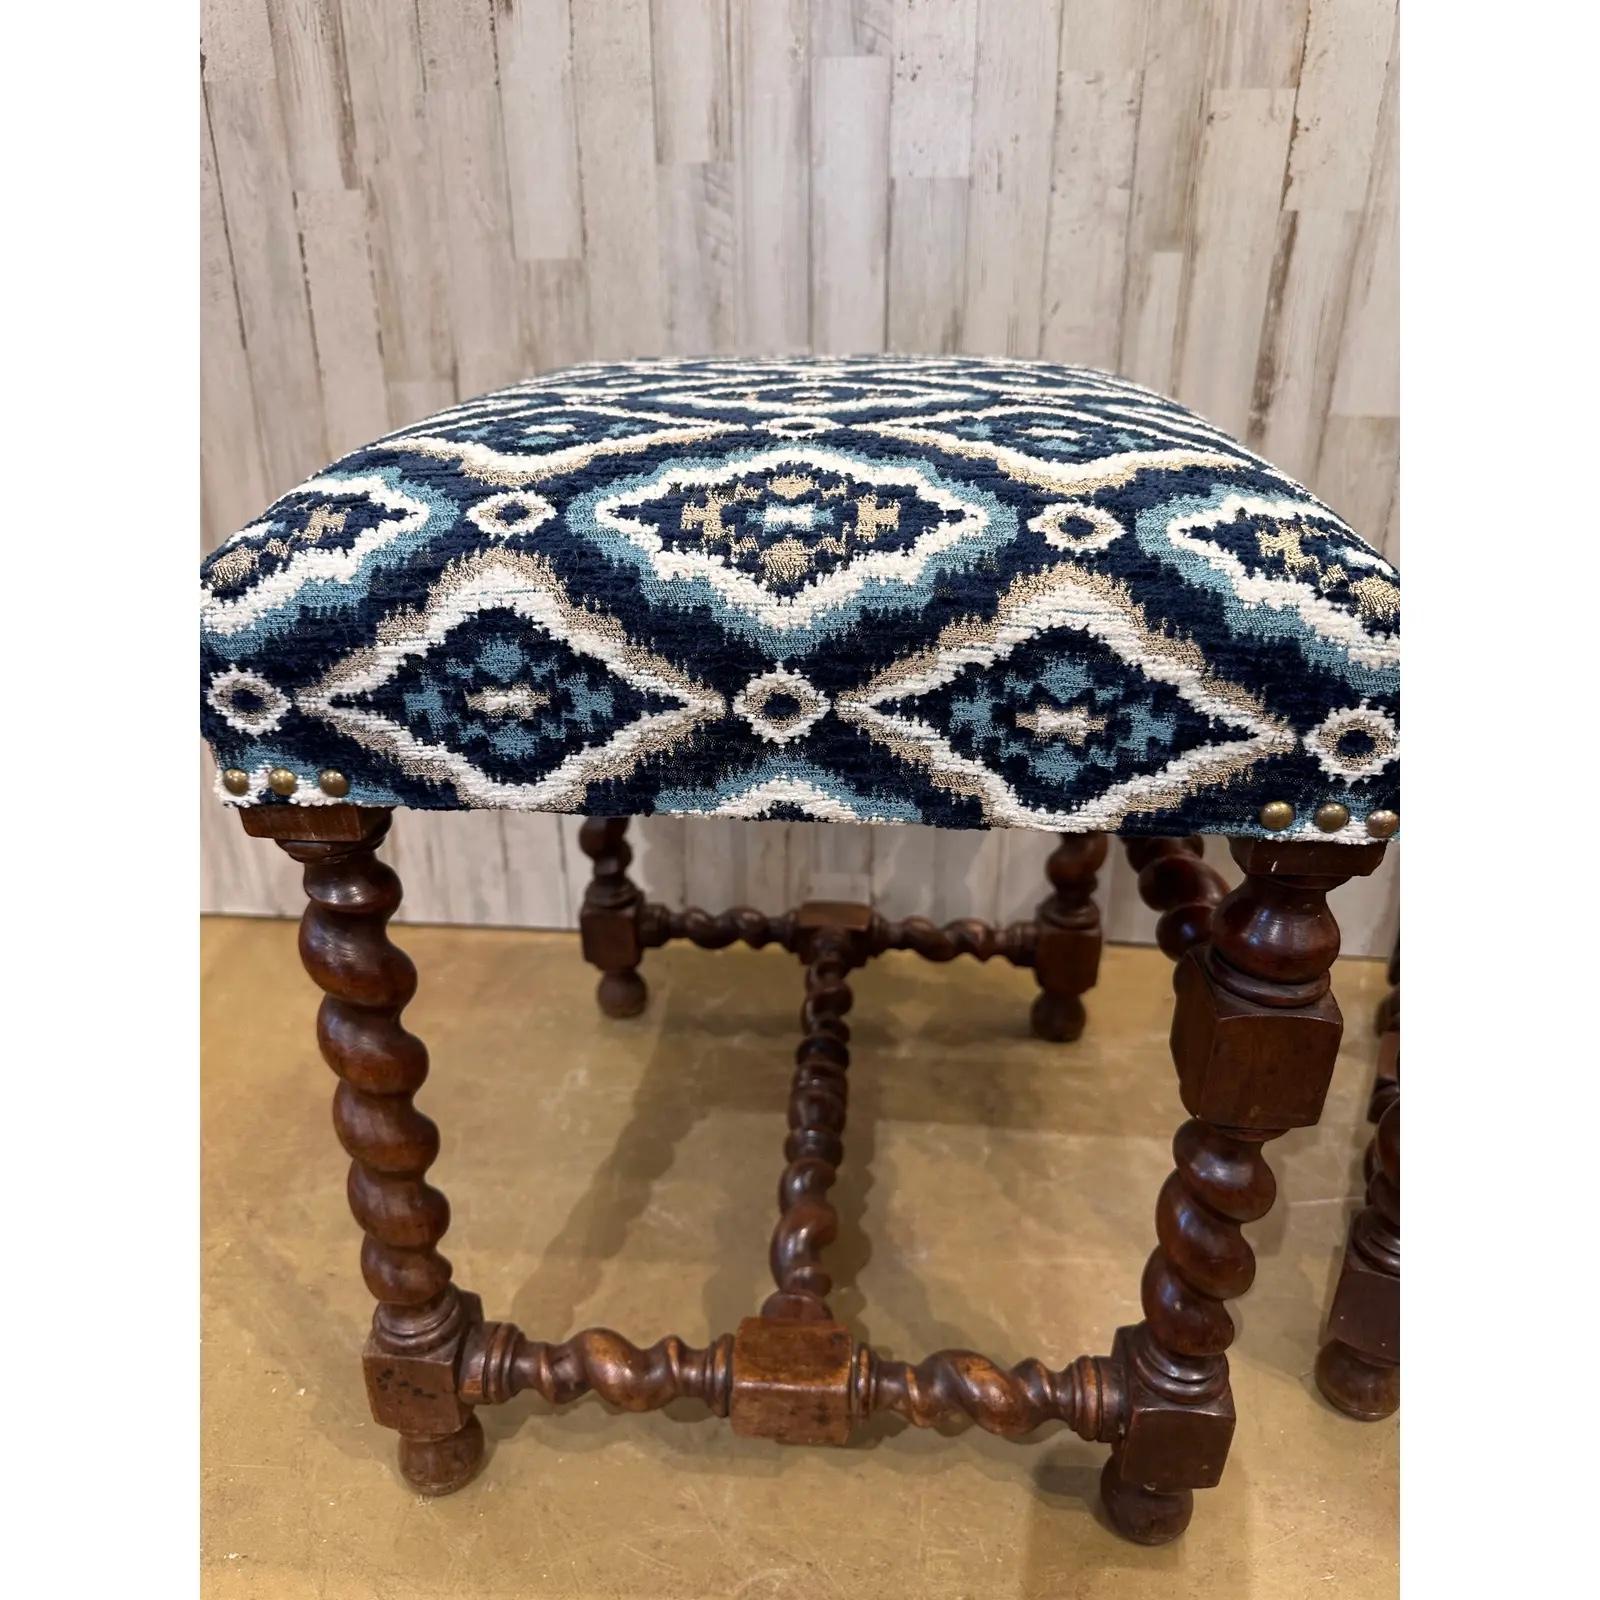 This pair of English barley twist frames have been newly reupholstered! The new fabric is a deep blue accented by white and sage green diamonds with the same blue interiors. The deep colors of the fabric compliment the rich colors of the wood. These